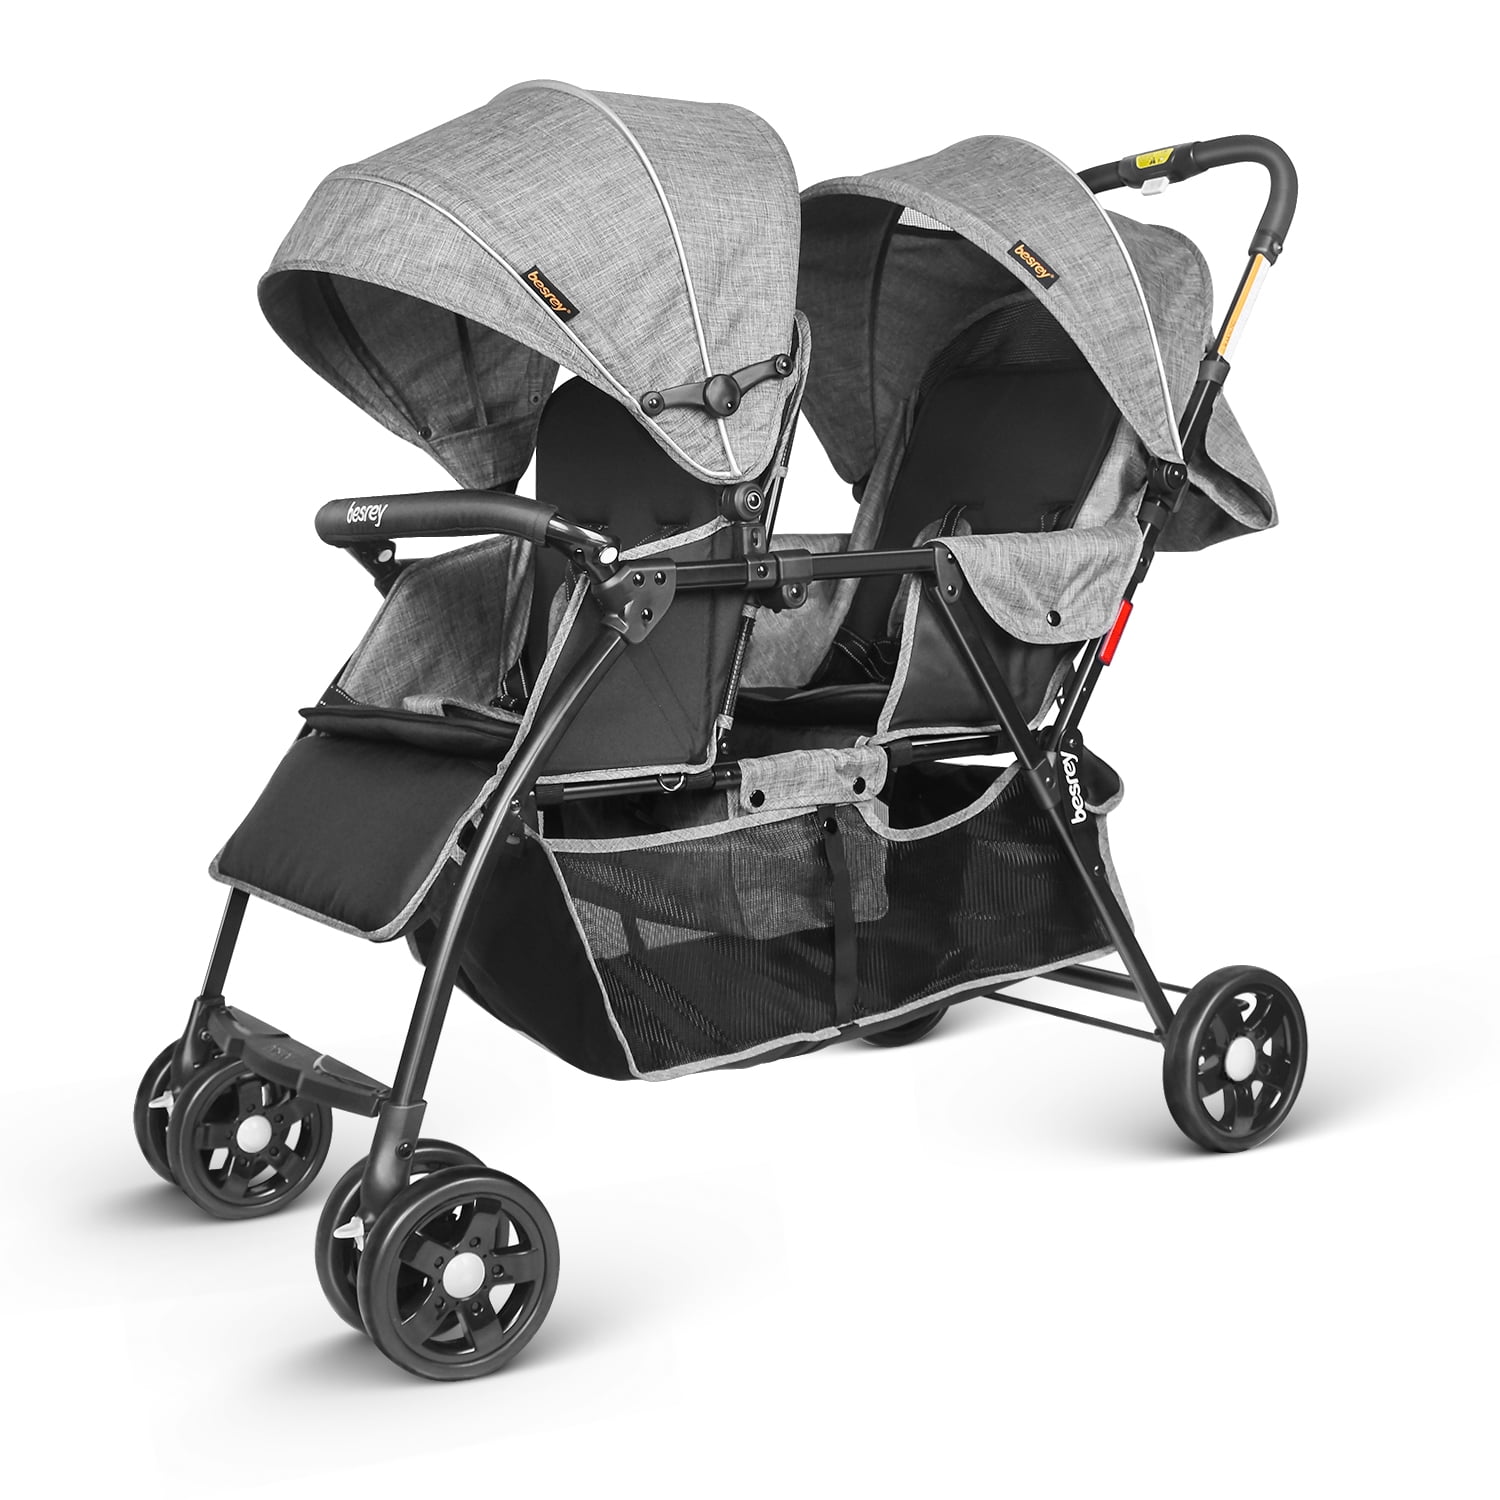 Baby Tandem Double Twin Pram Travel System Grey Carseat Carrycot & Raincover 